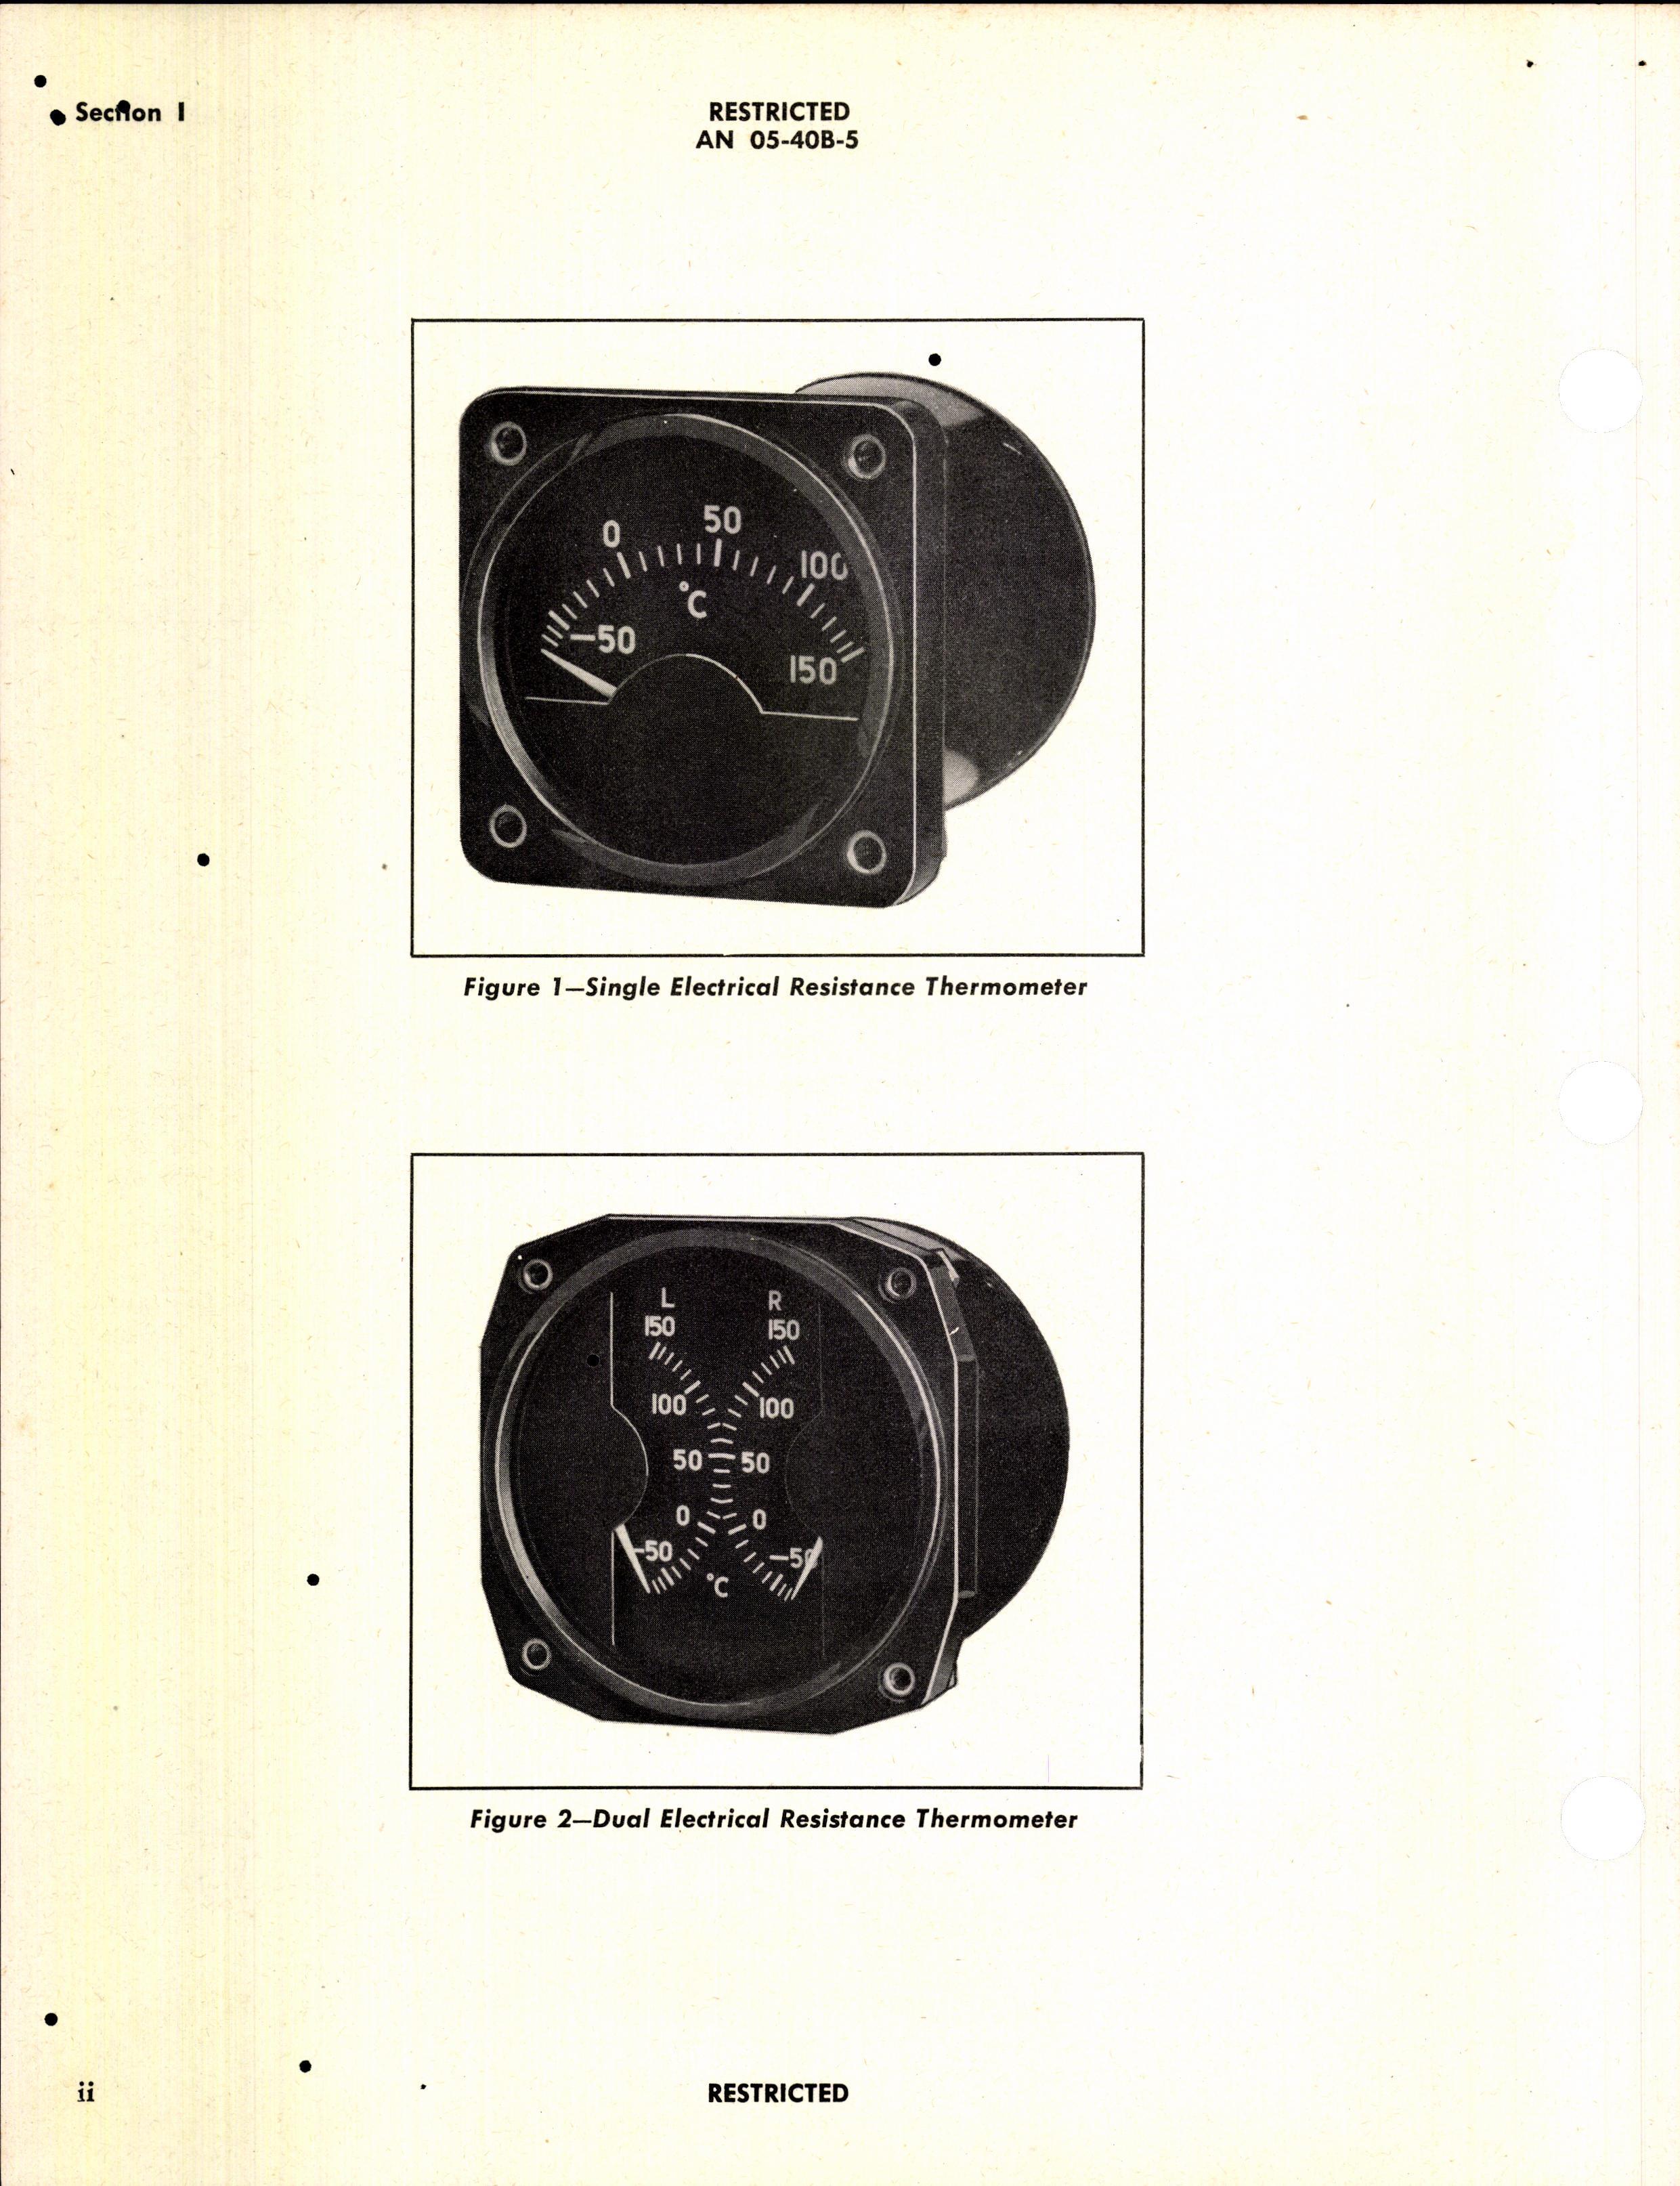 Sample page 4 from AirCorps Library document: Operation, Service, & Overhaul Instructions with Parts Catalog for Thermometer Indicators